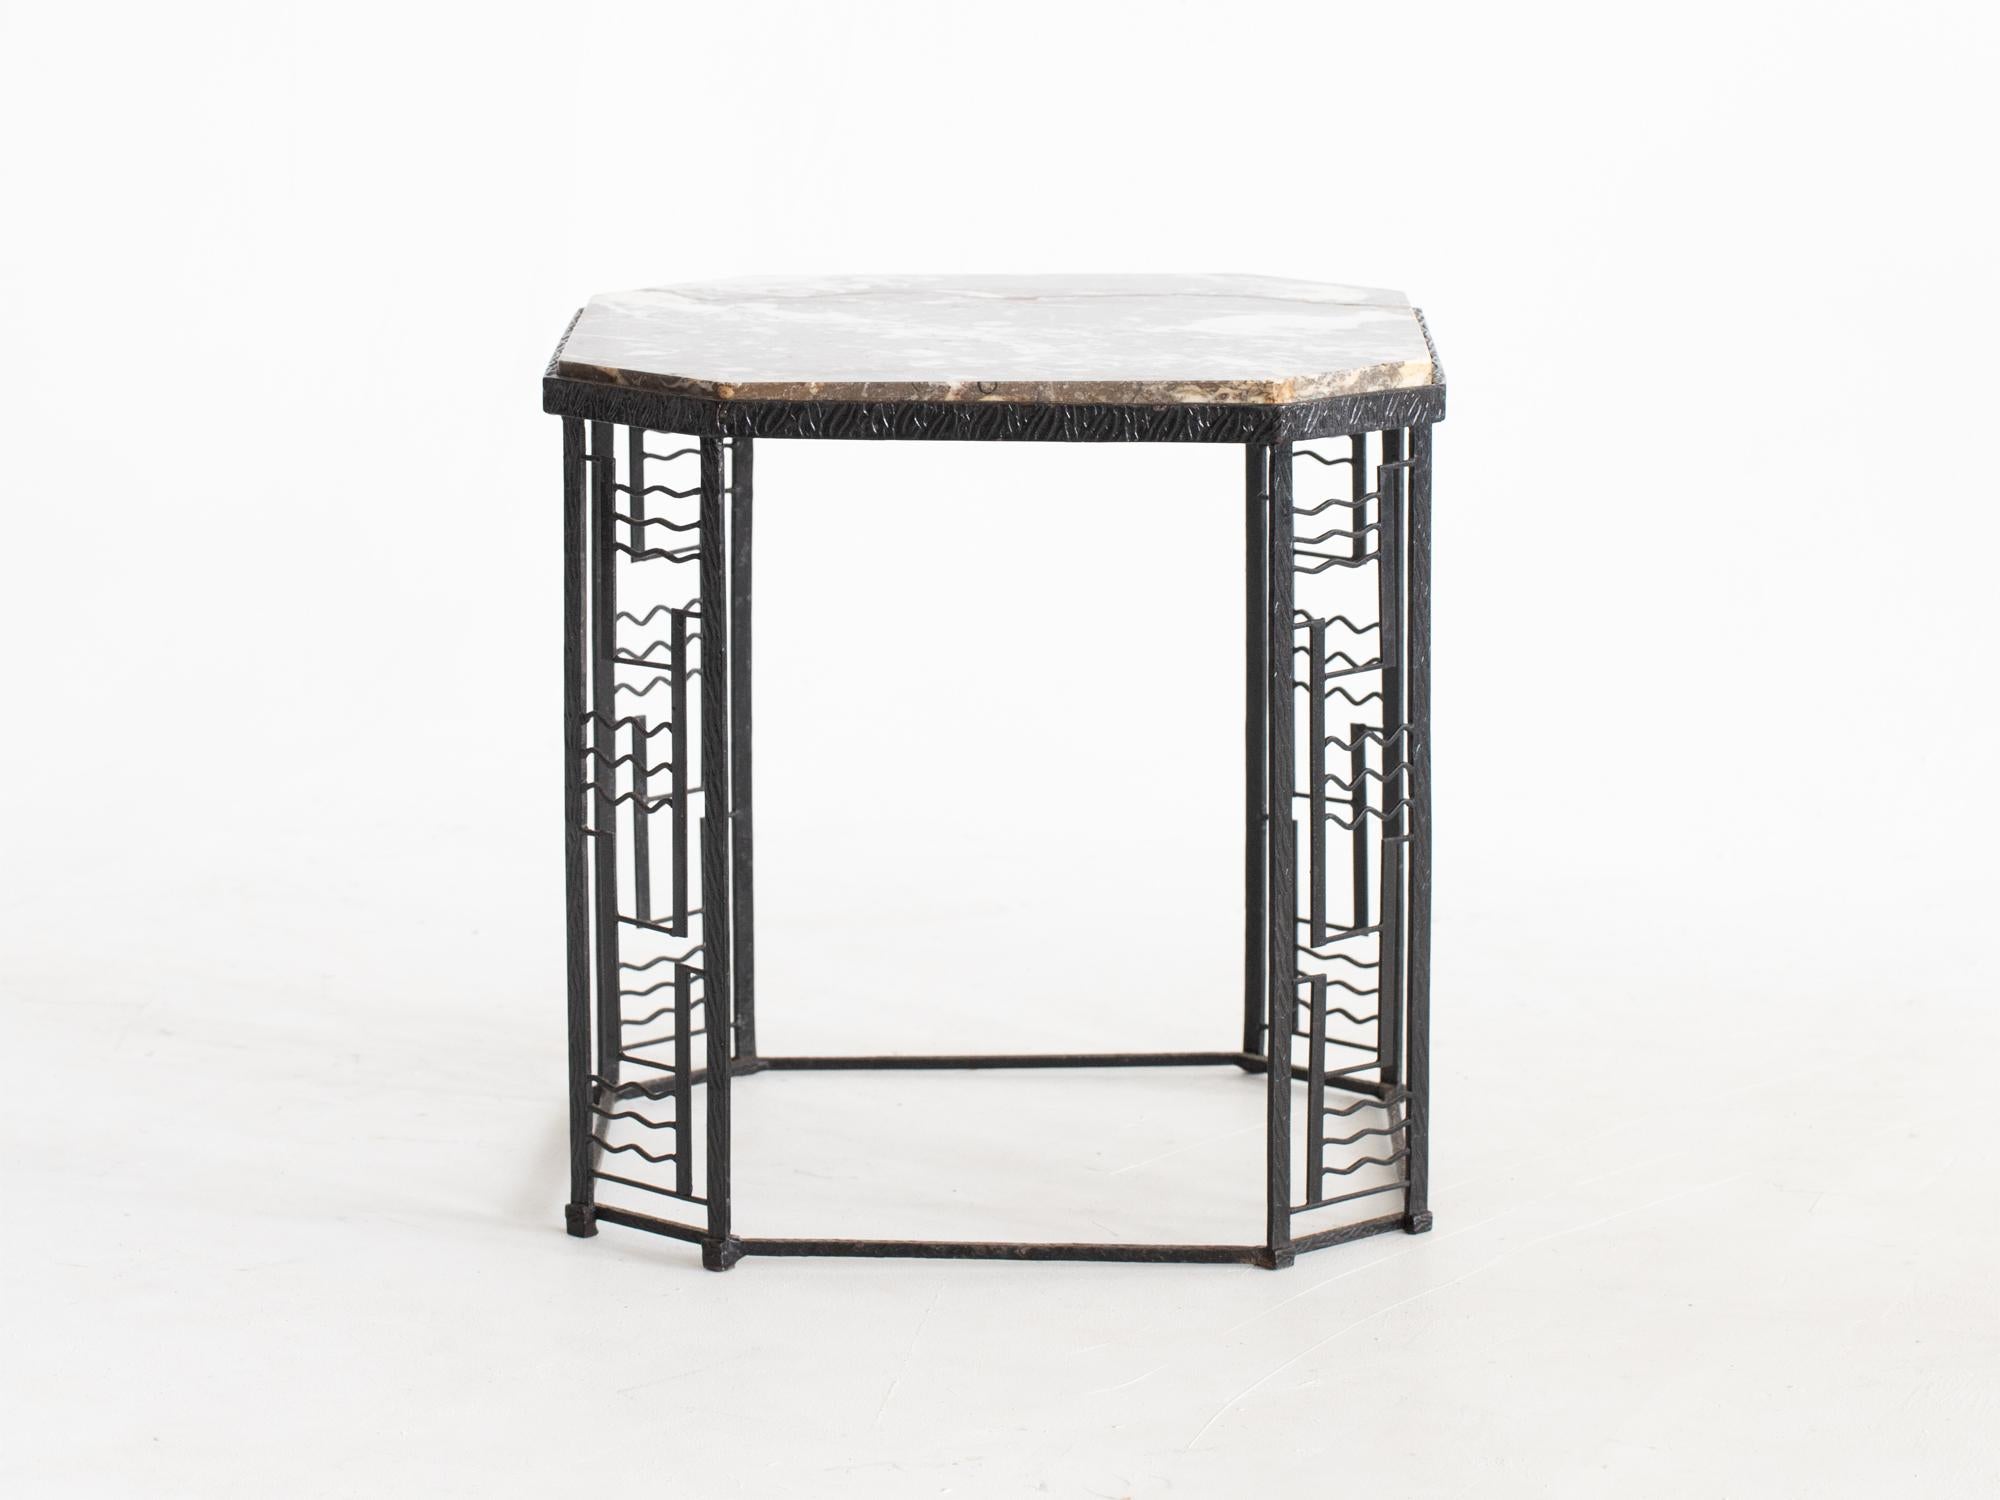 An octagonal Art Deco marble and iron side table. French, c. 1930s.

Stock ref. #2385

In good sturdy order. A filler repair to the marble top.

46 x 47 x 47 cm

18.1 x 18.5 x 18.5 